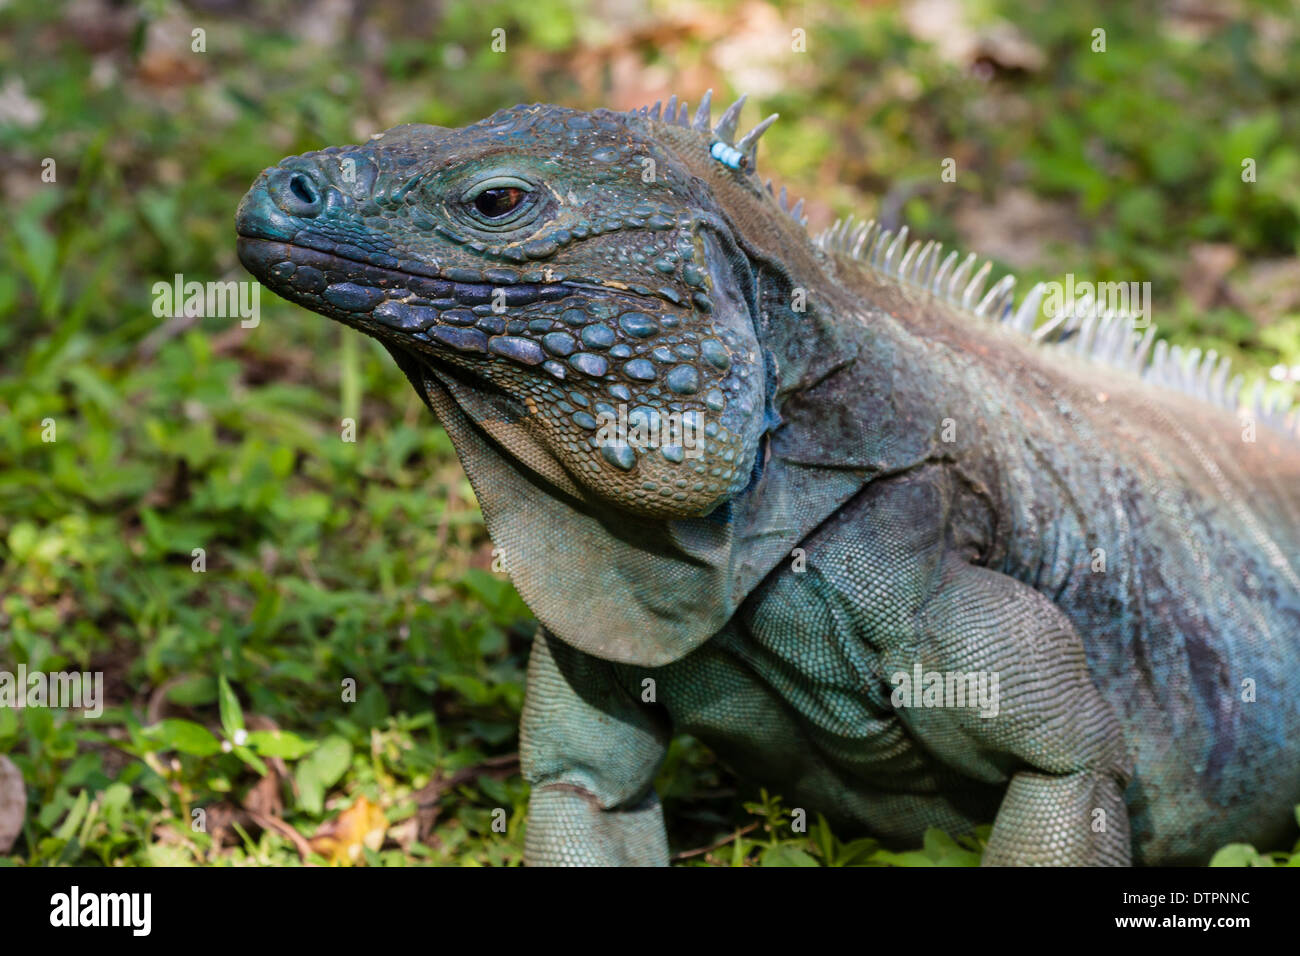 Close-up of a blue and turquoise endangered male blue iguana in Queen Elizabeth II Botanic Park on Grand Cayman, Cayman Islands Stock Photo